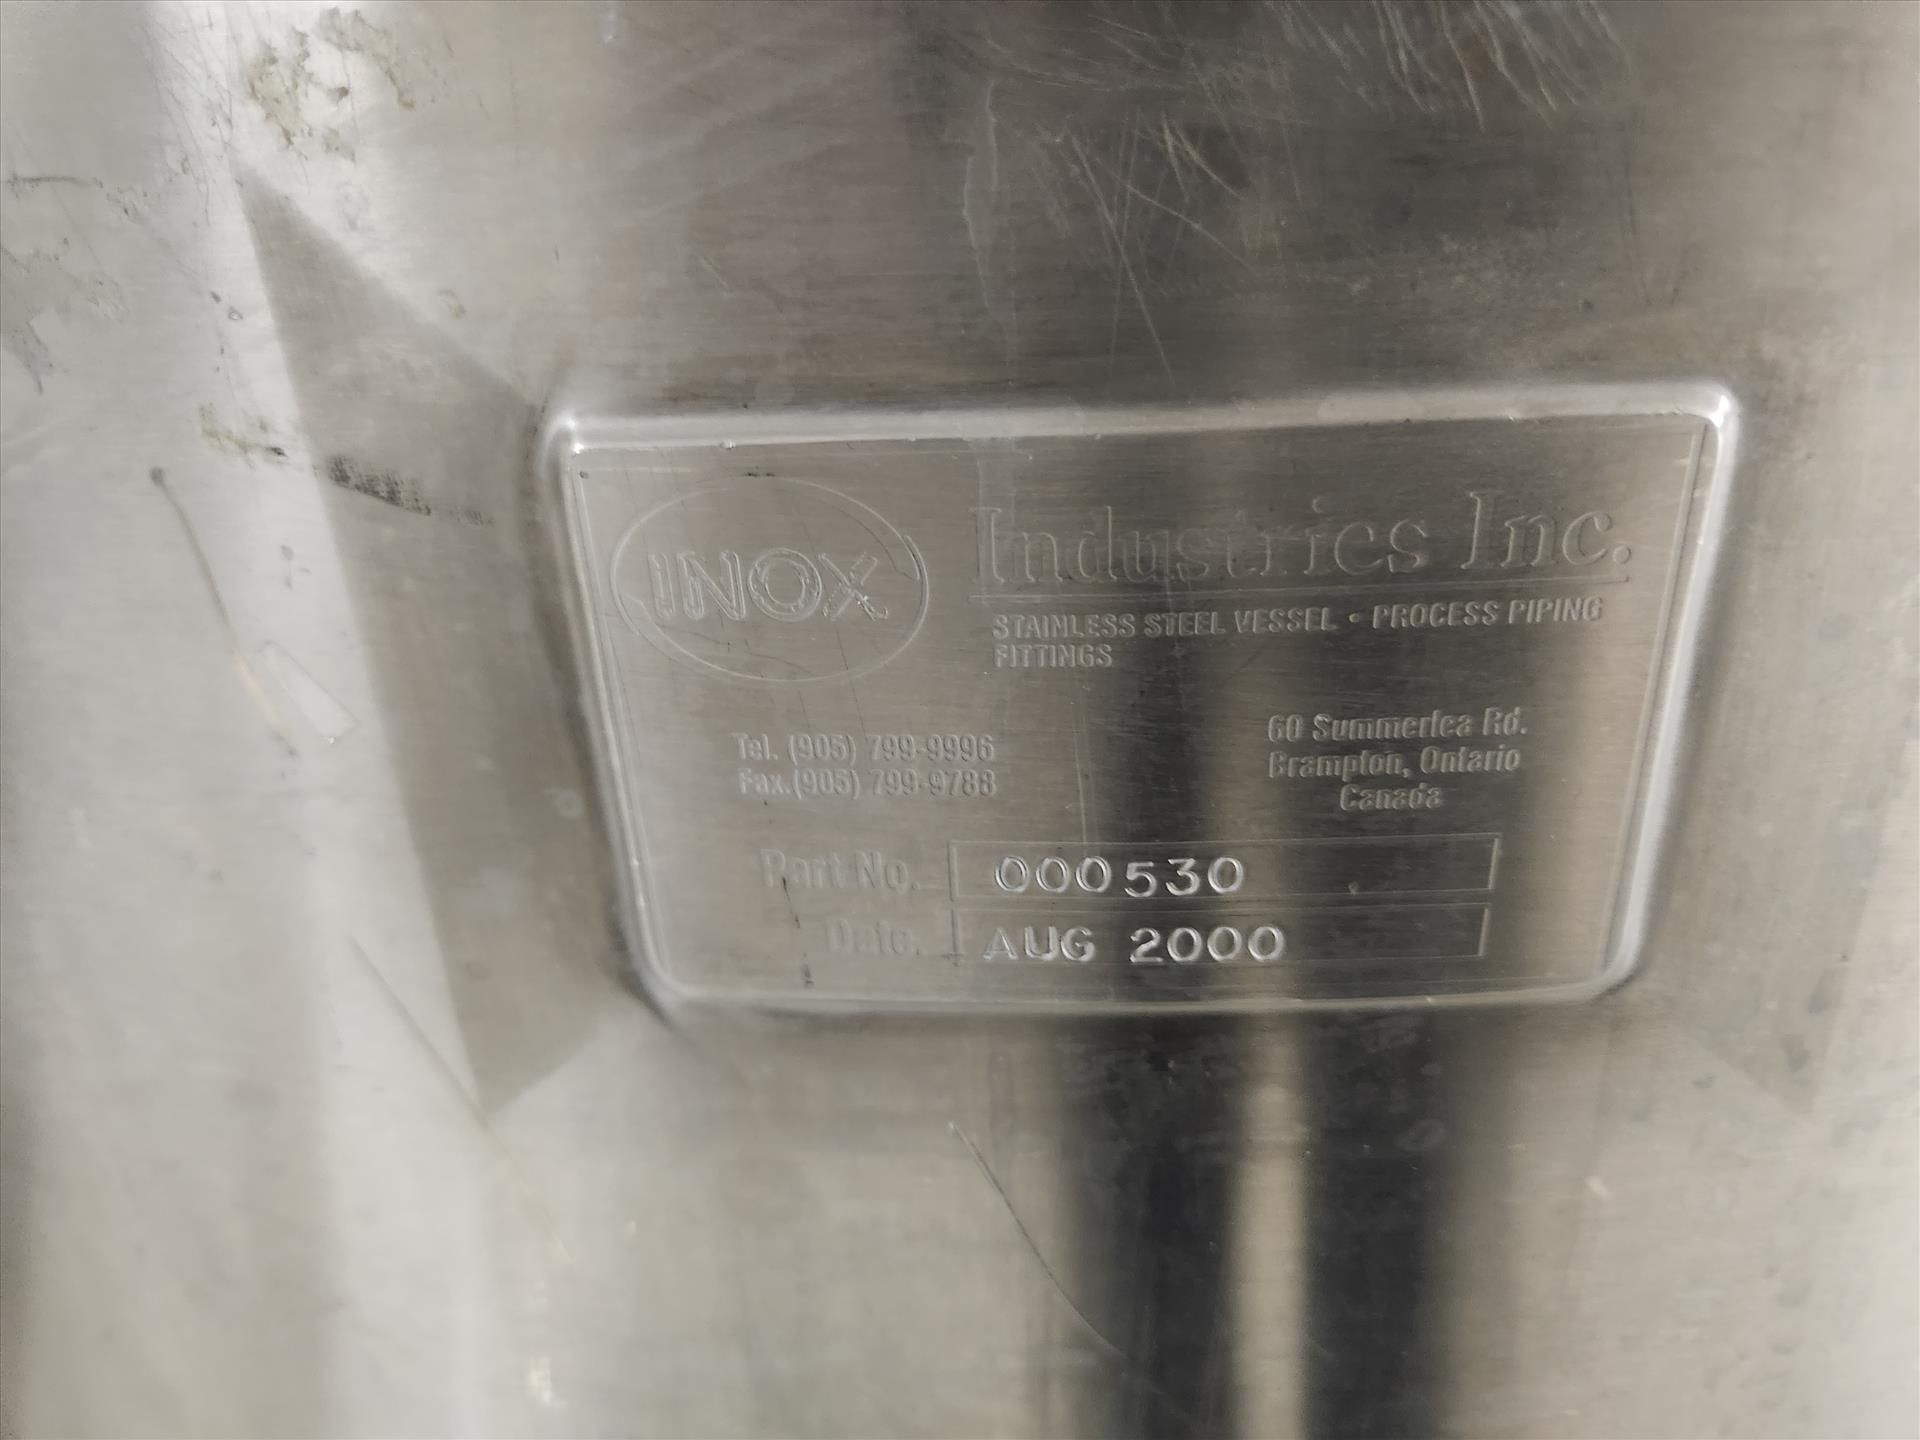 Inox tank, stainless steel, 500 L, open top w/ lid, bottom discharge, casters - Image 3 of 3